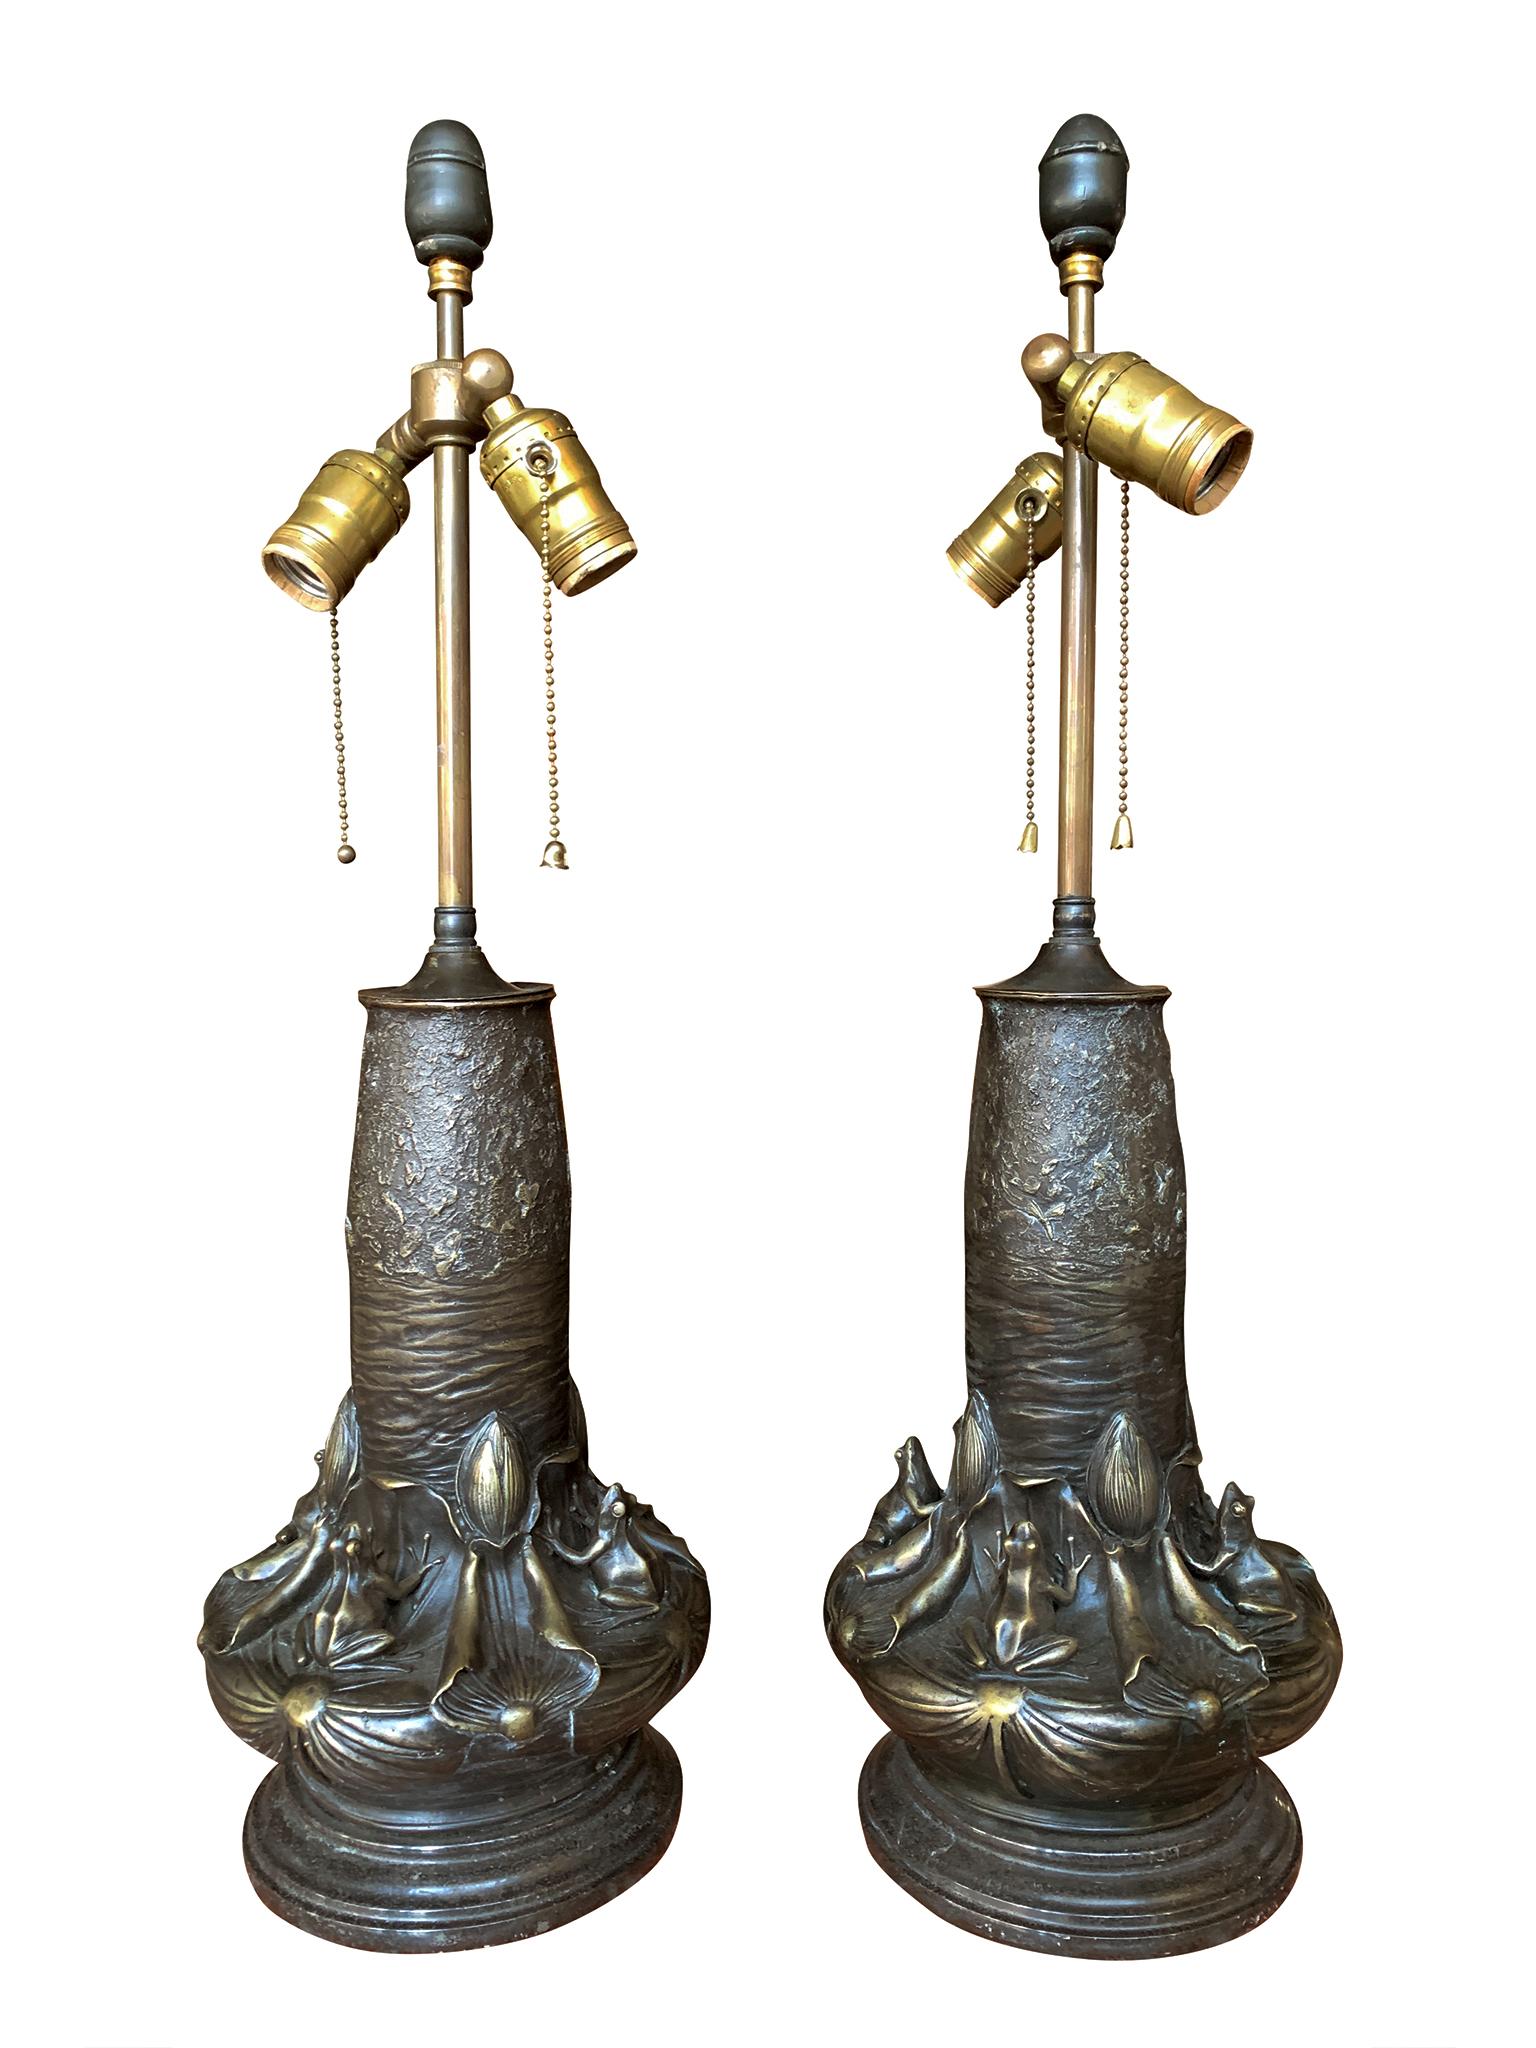 A pair of 20th century bronze table lamps in the Art Nouveau style by Jean Bunand. The body is decorated with frogs sitting poised on lily pads and gazing at the flying insects above them. The round bases are black marble. Each lamp is paired with